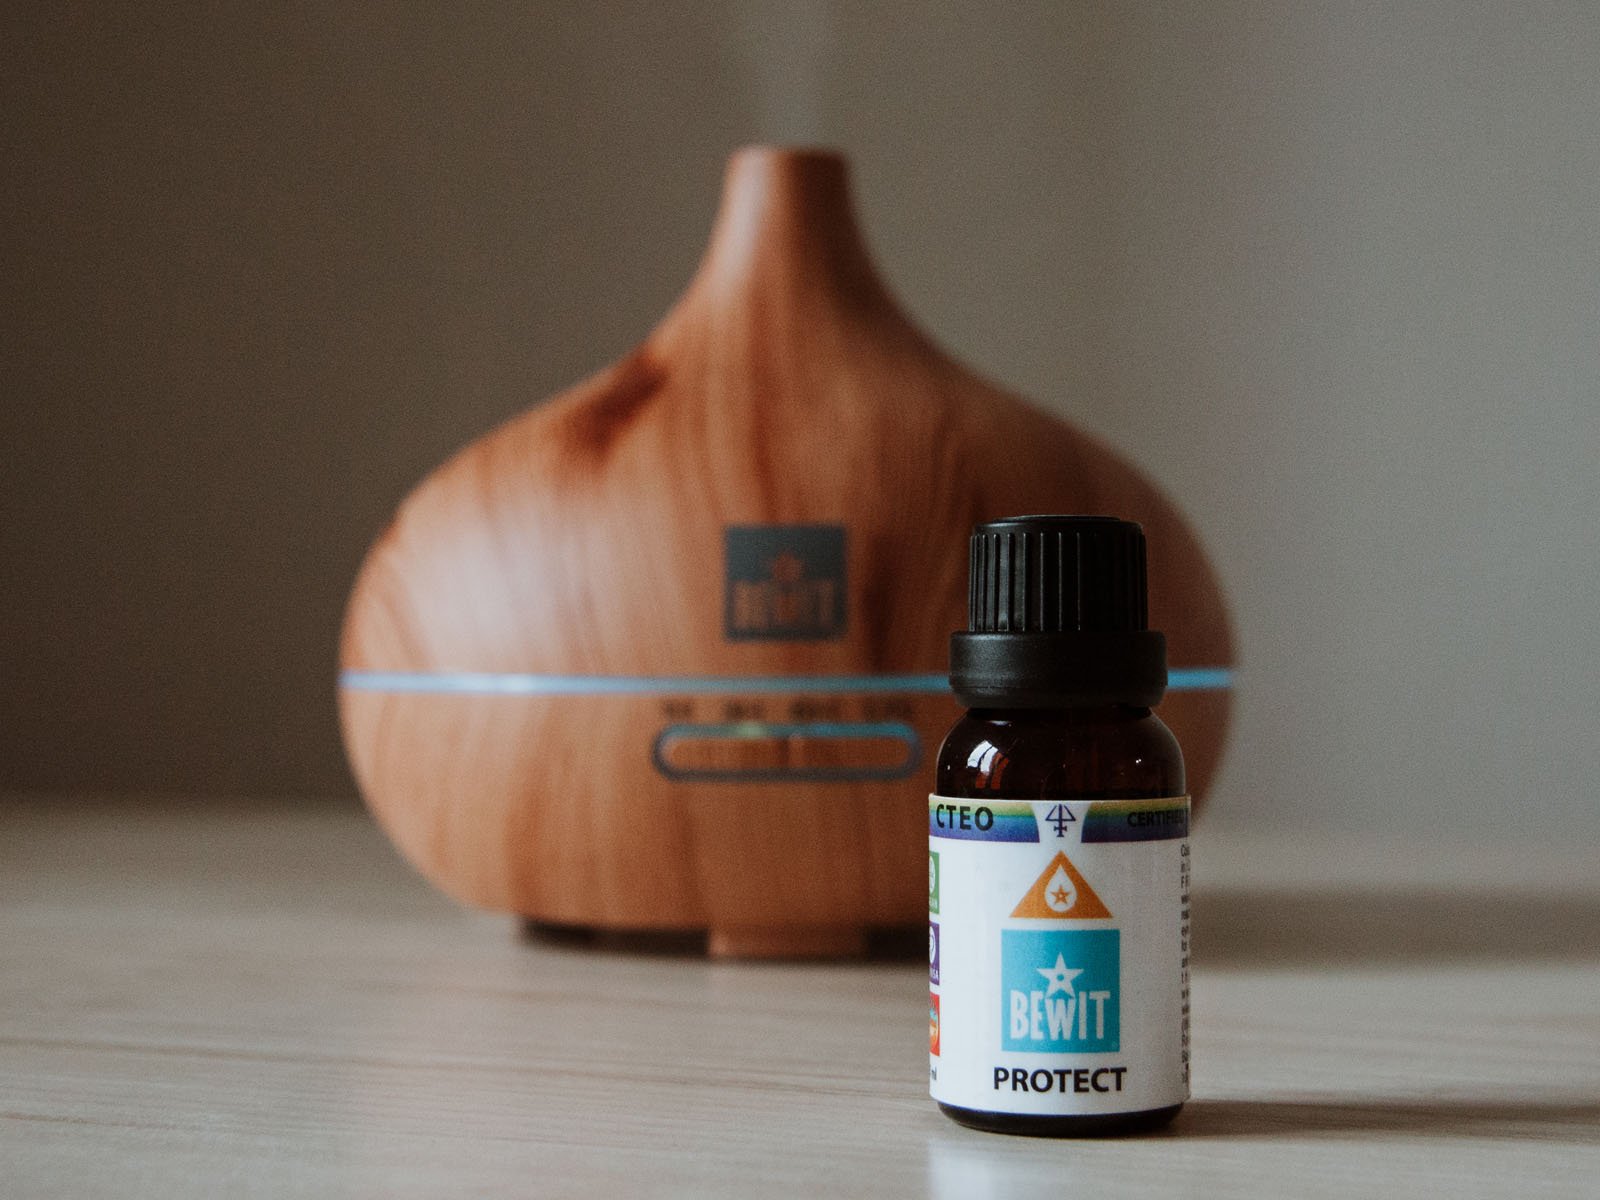 BEWIT PROTECT - A unique blend of the essential oils - 4